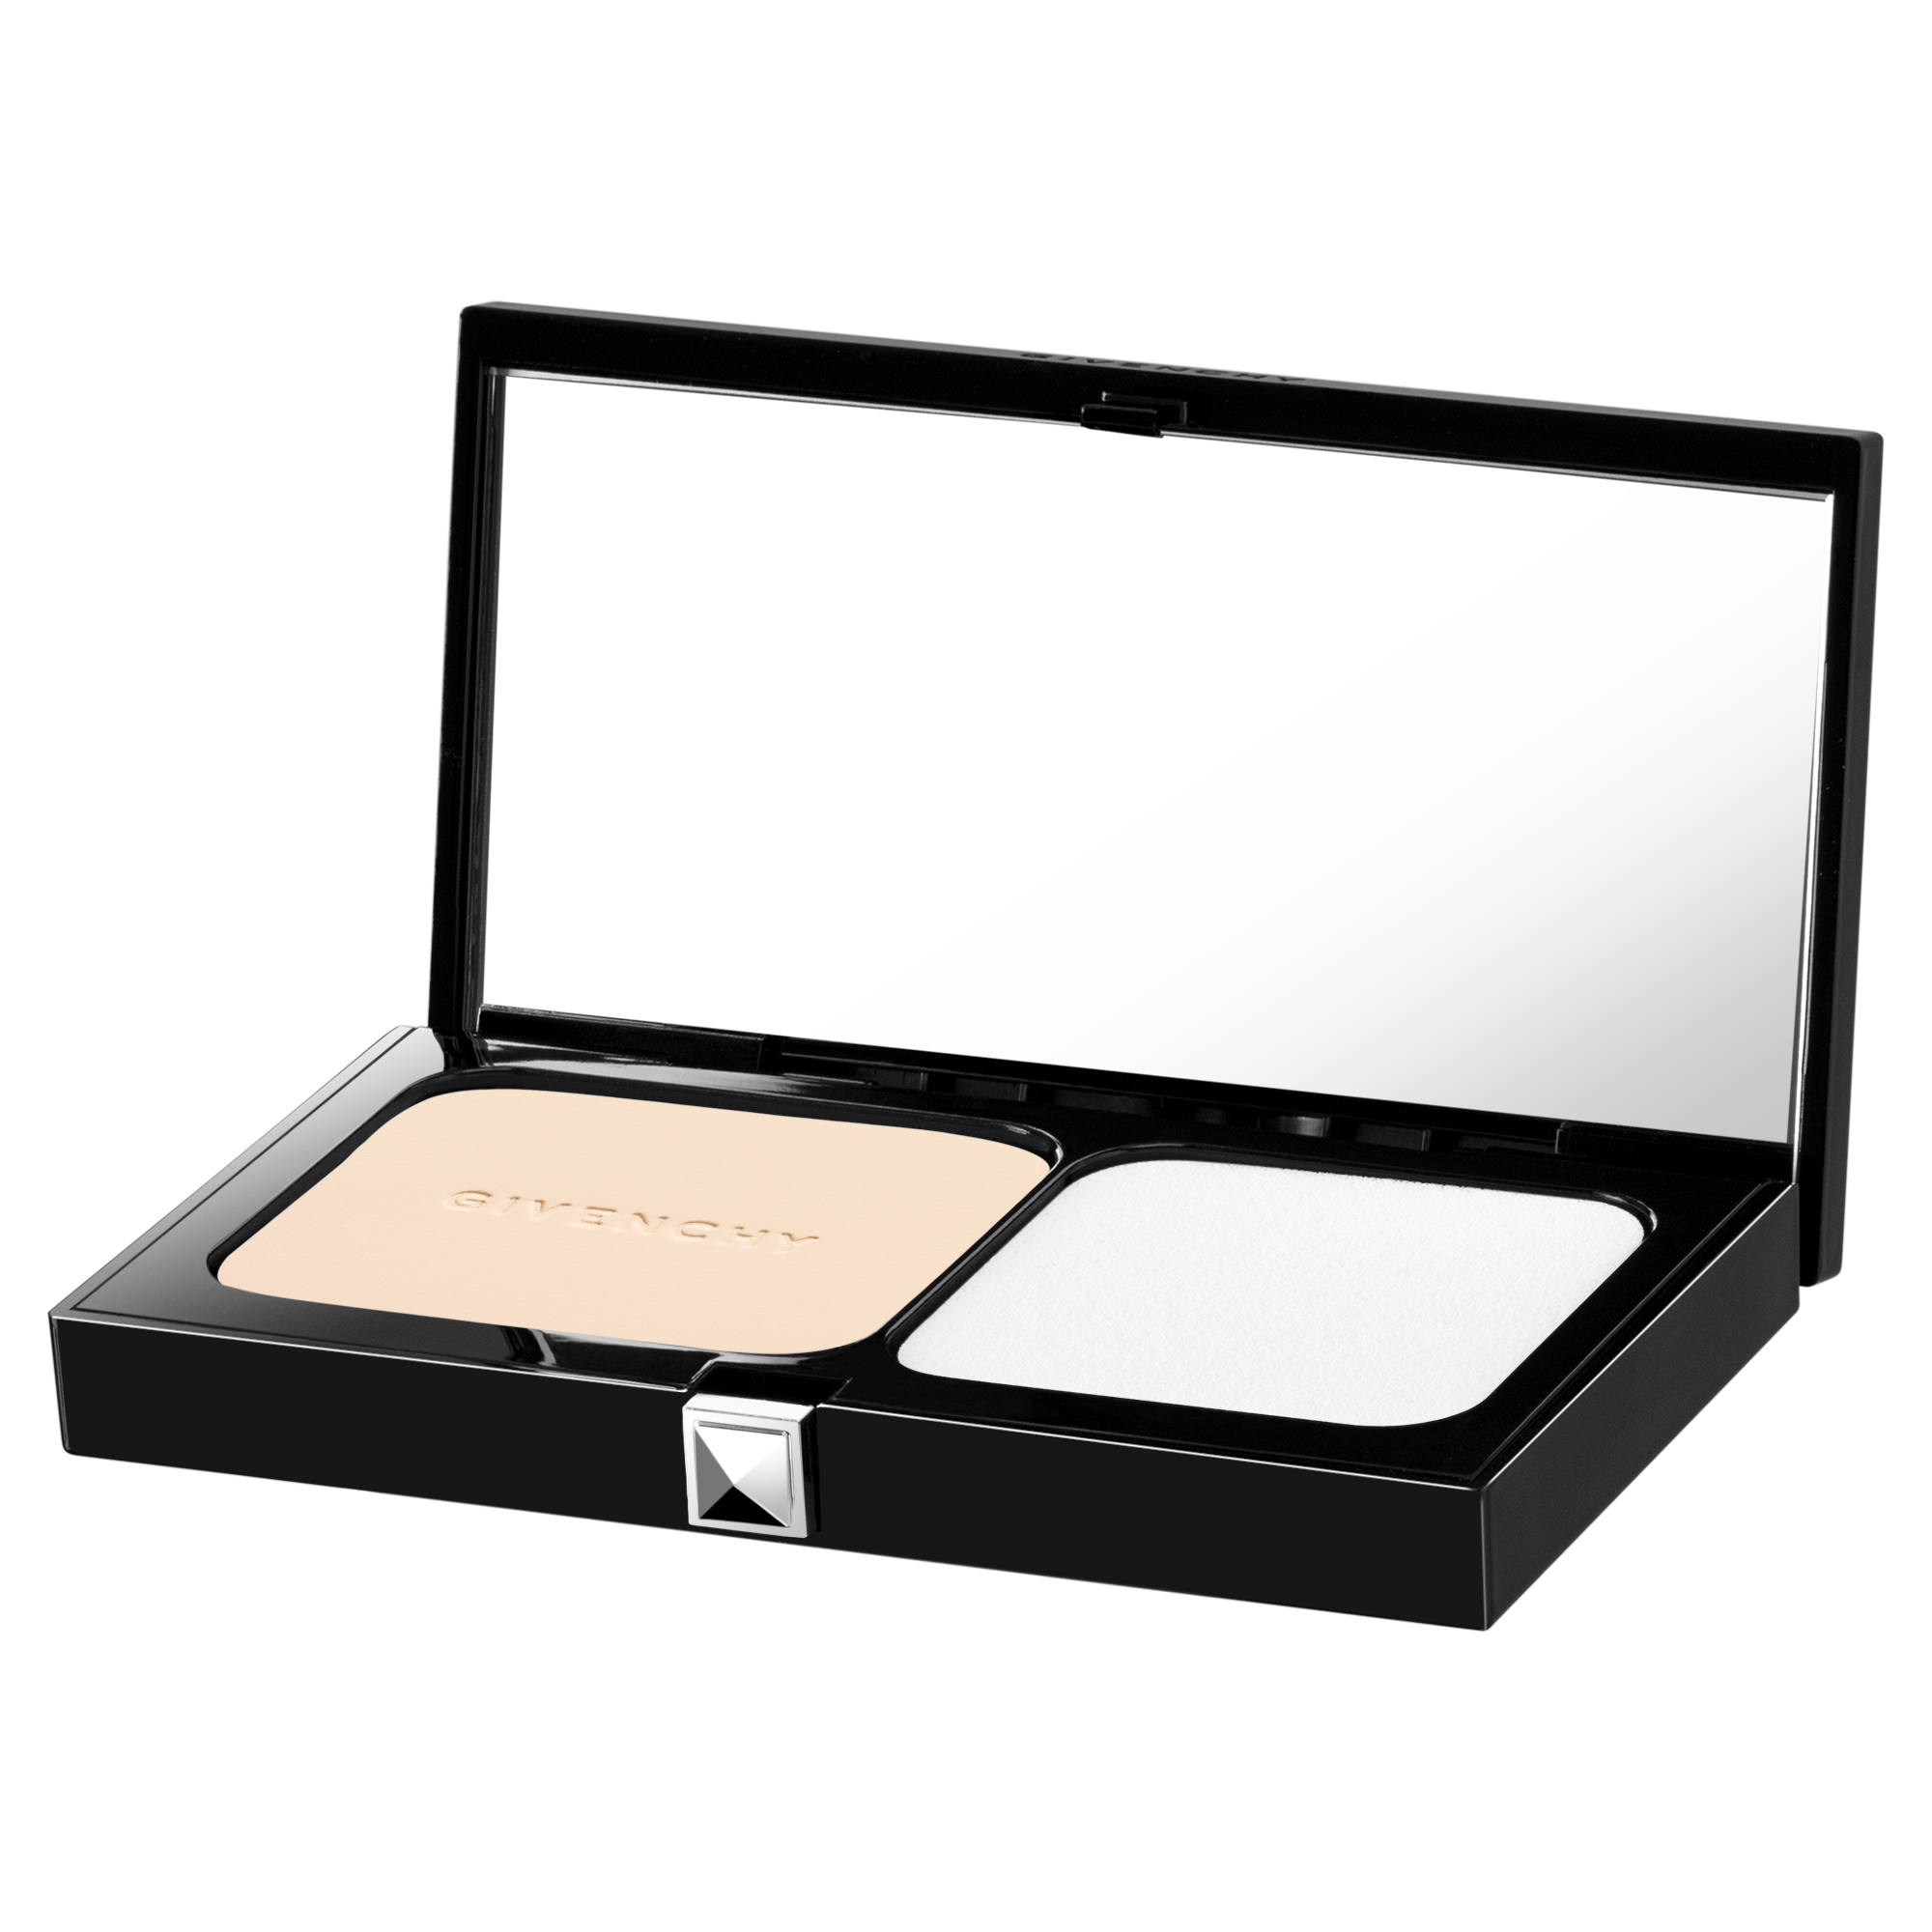 givenchy compact foundation